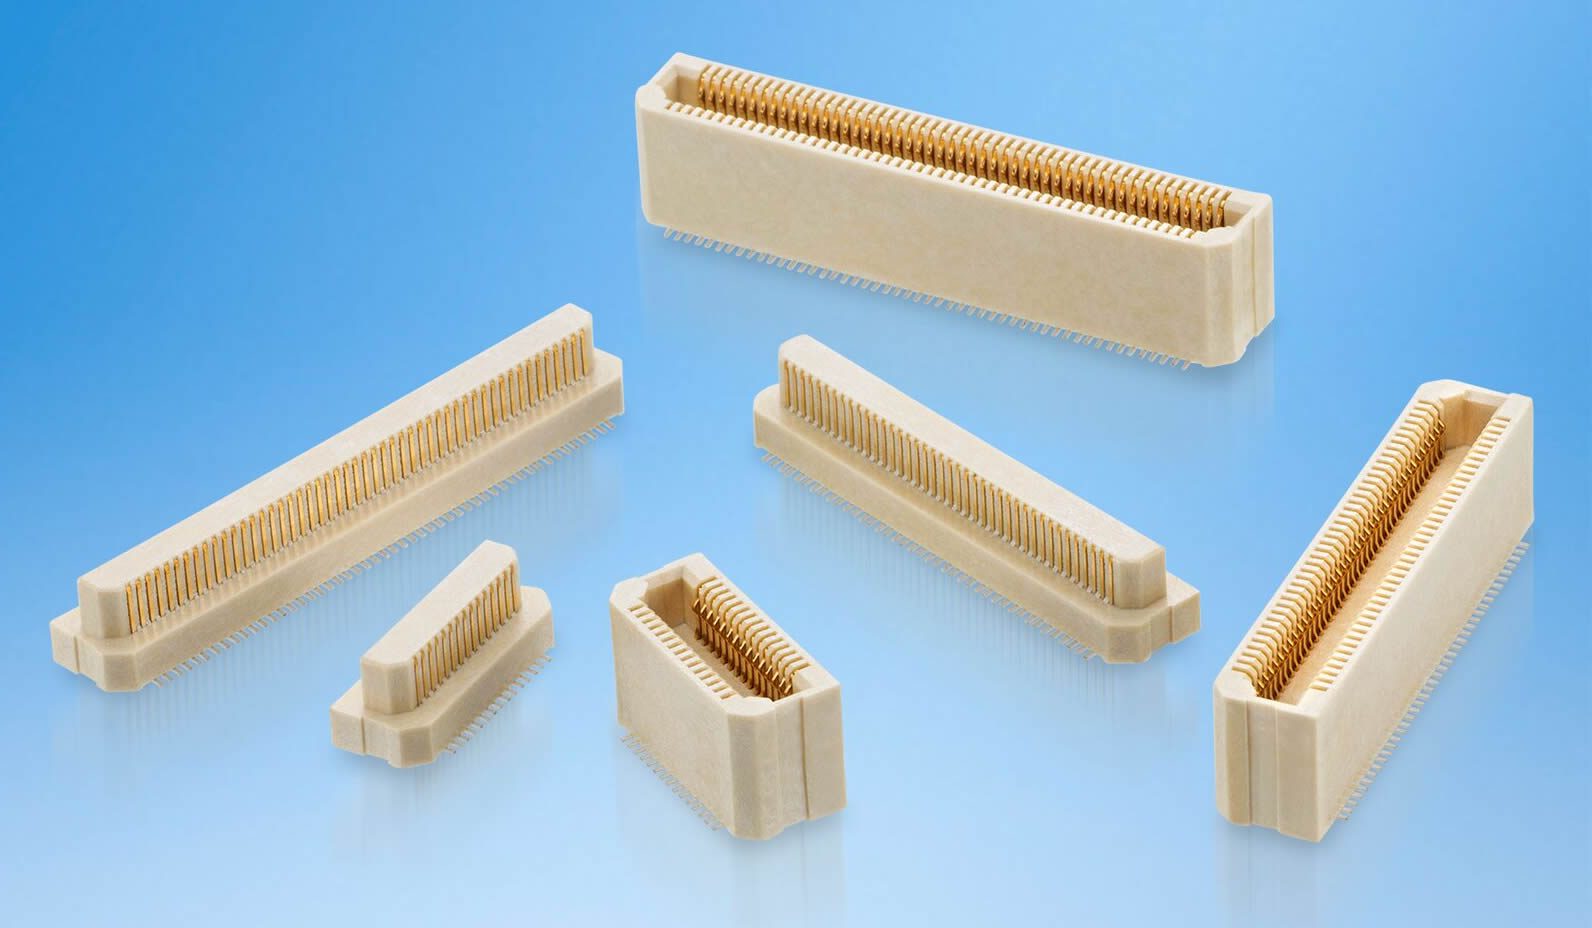 Harwin boosts its range with a 0.5 mm pitch mezzanine connector